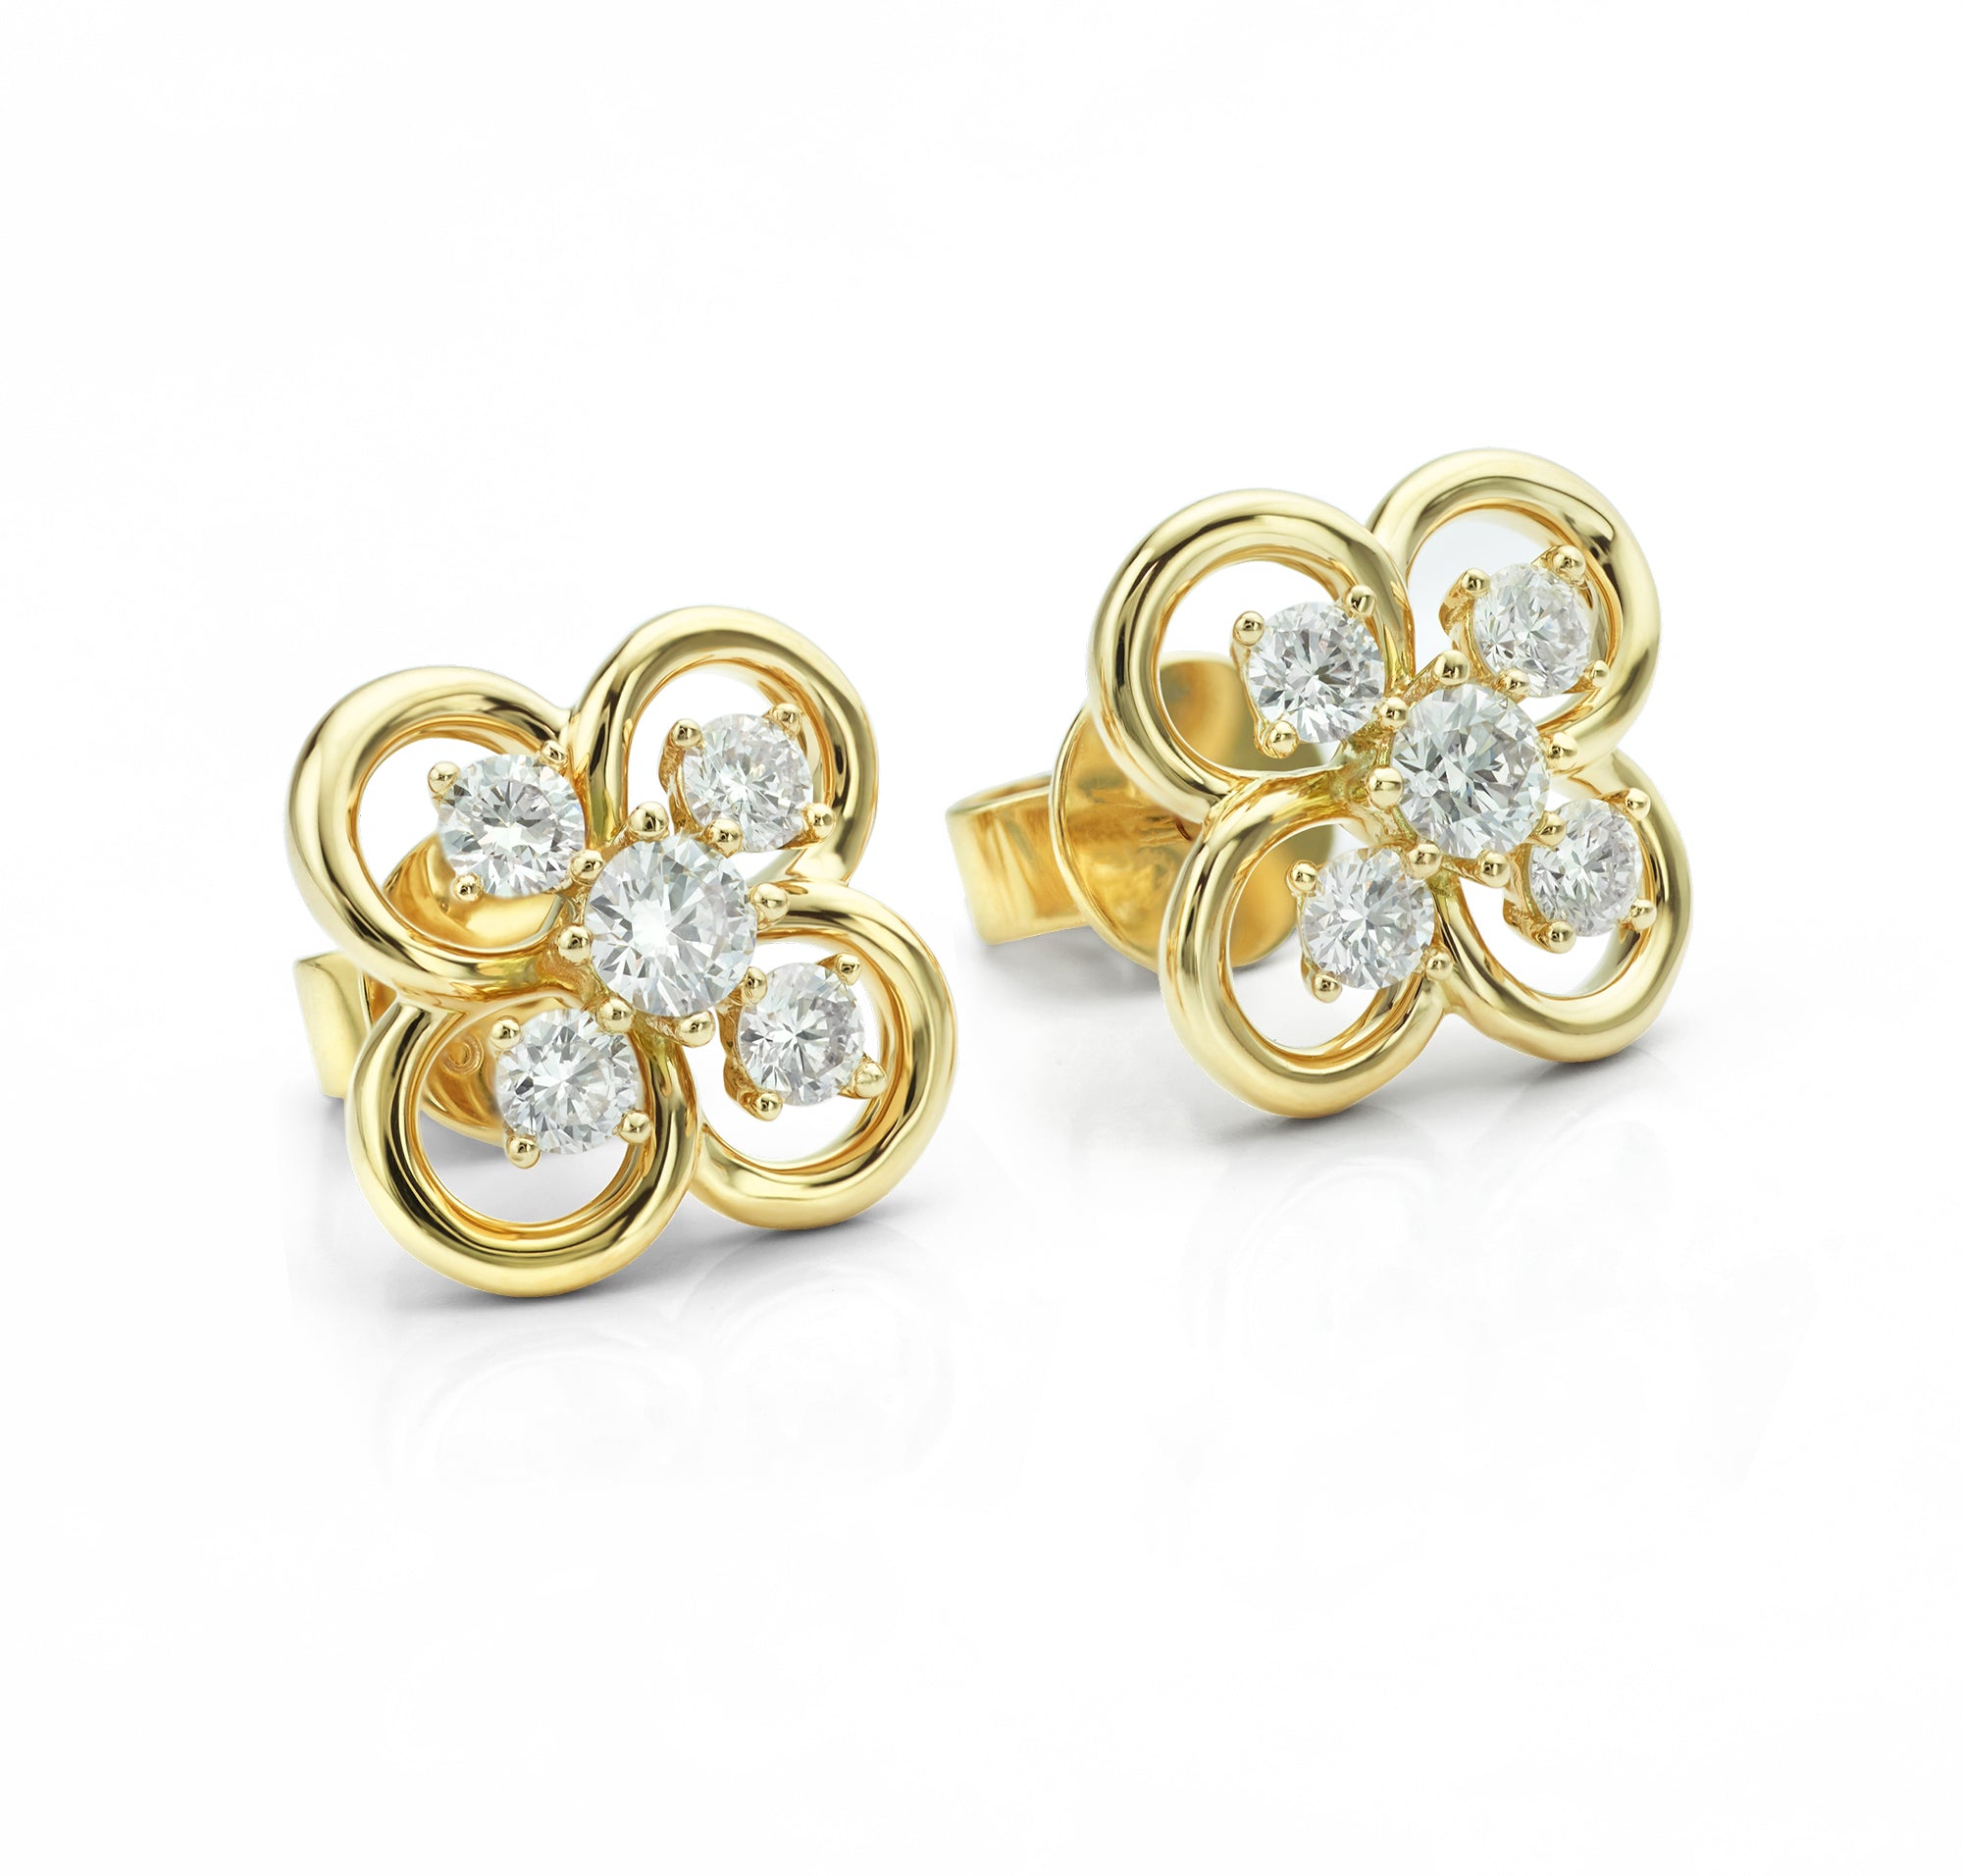 Blossom 5 stone diamond earrings in yellow gold